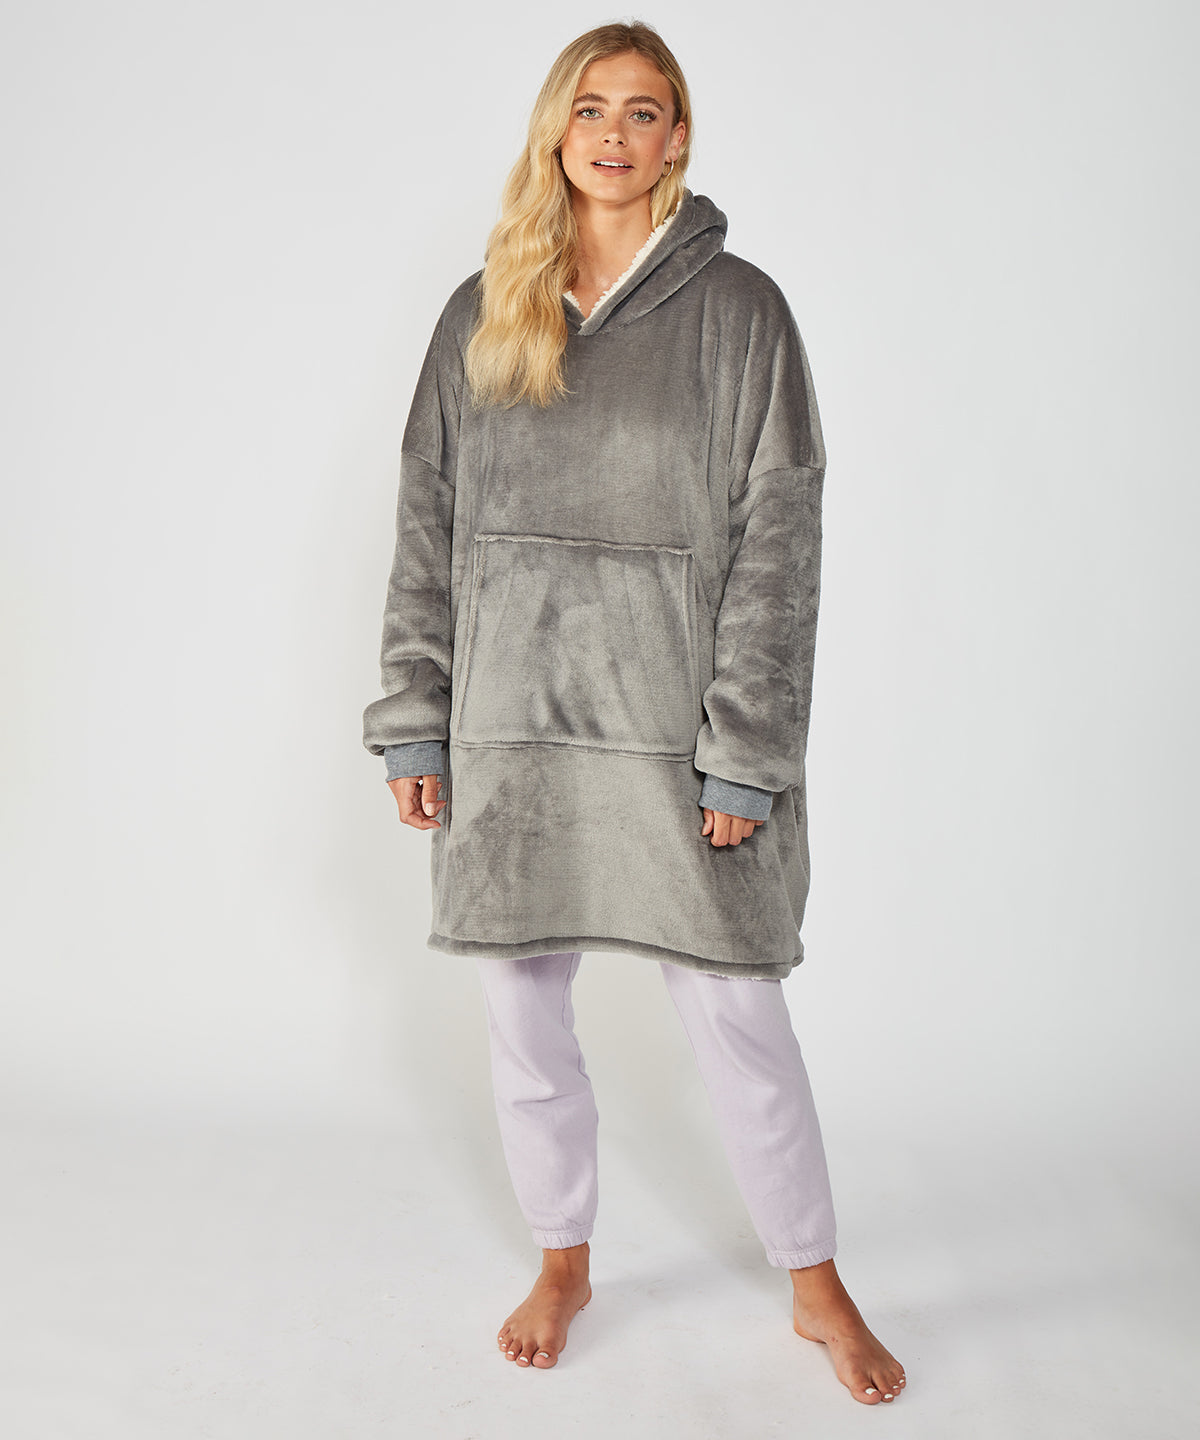 Snuggly Oversized Hoodie